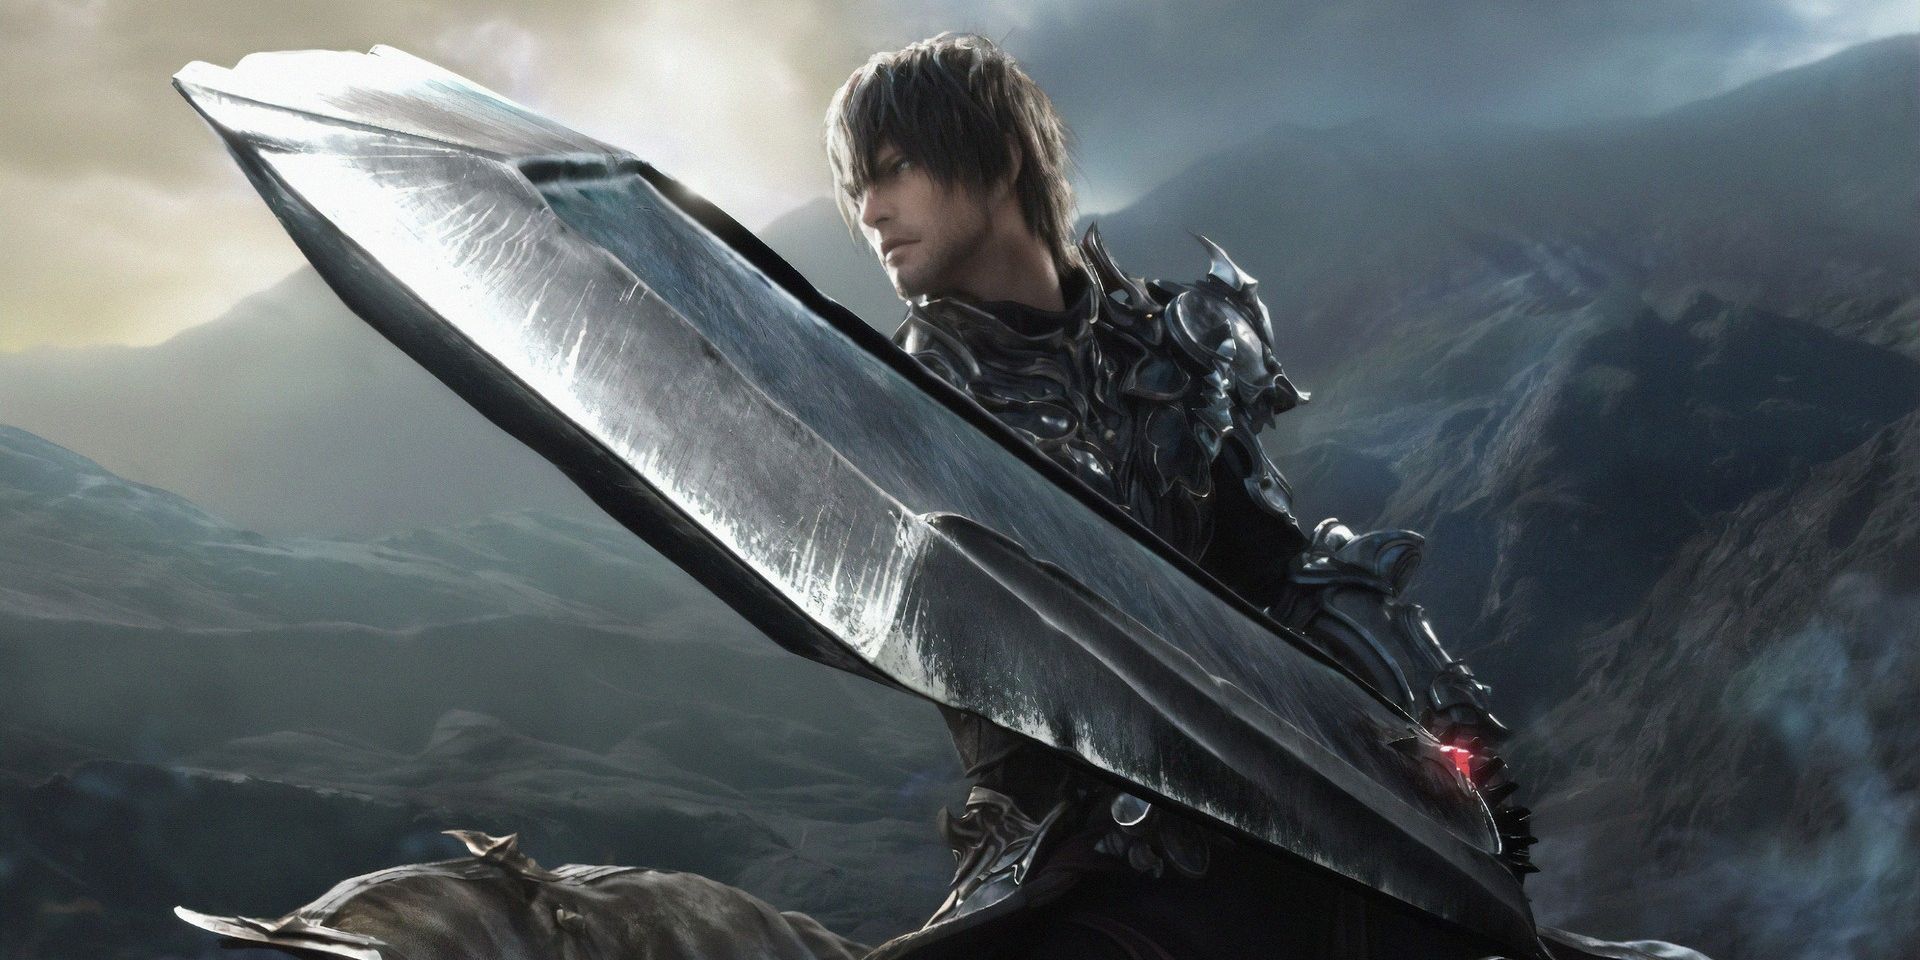 A character from Final Fantasy 16 wielding a large sword.